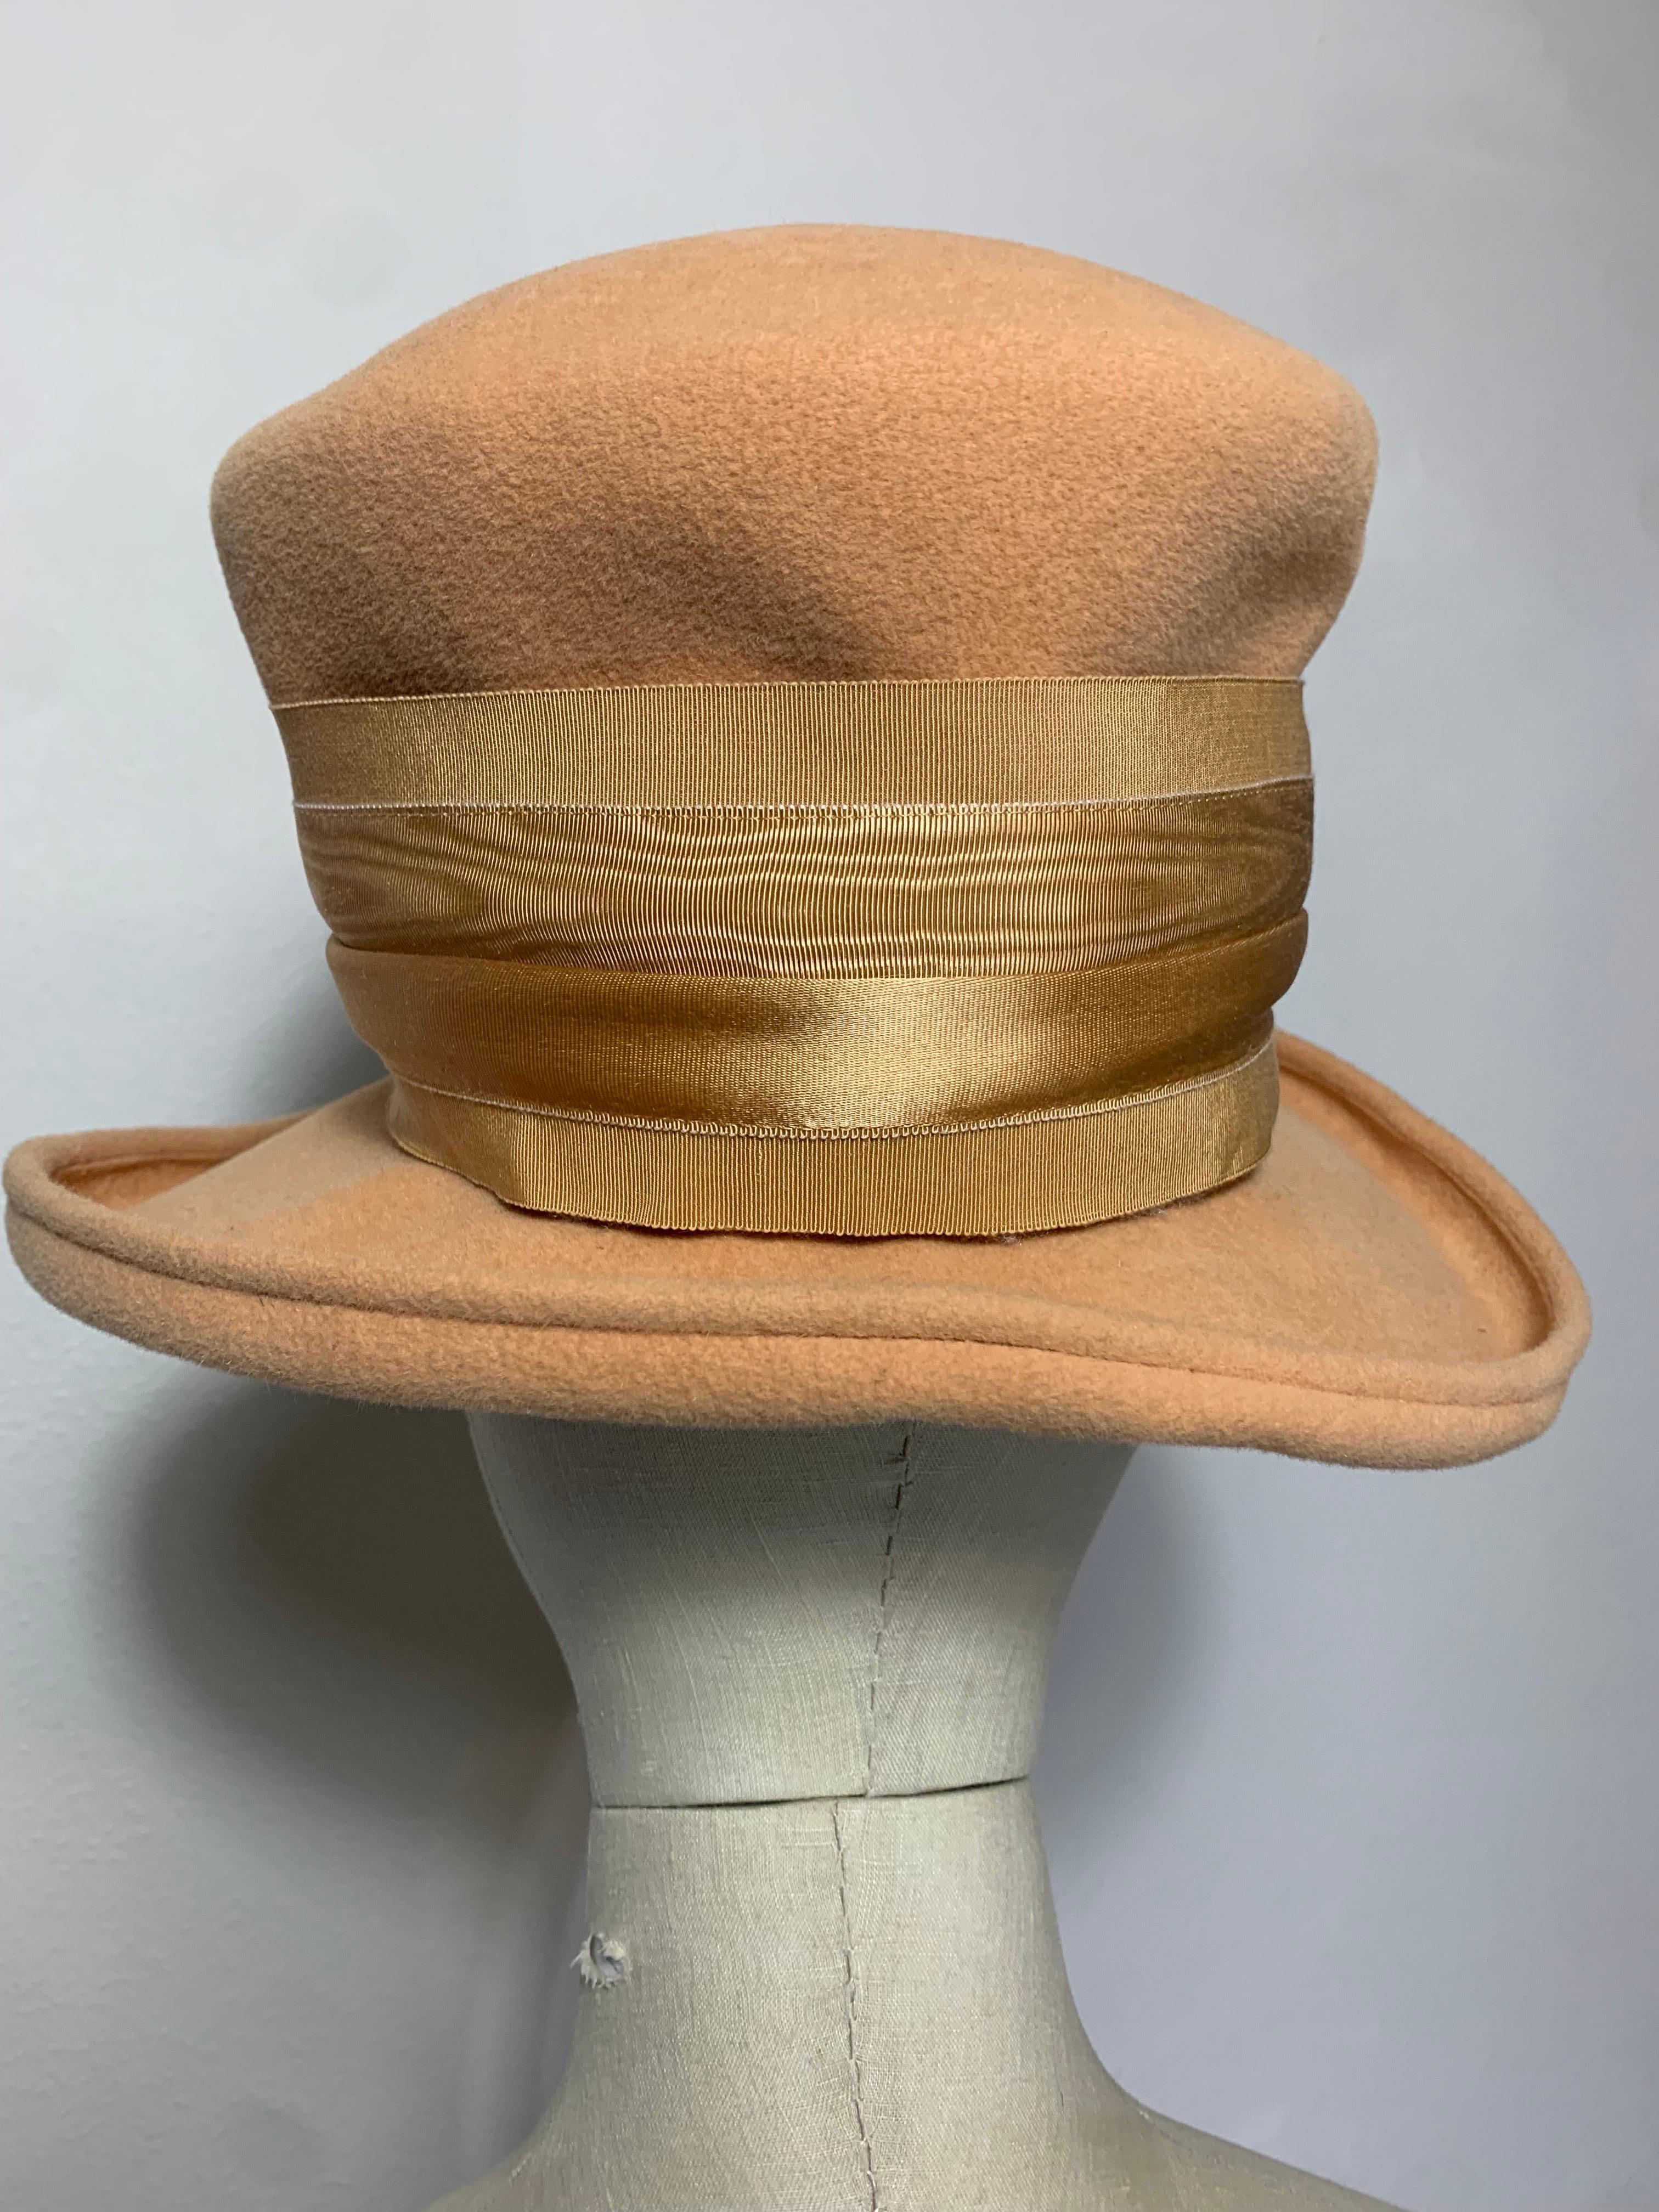 Maison Michel Apricot Felt High Top Hat w Large Feather Spray & Striped Band For Sale 2